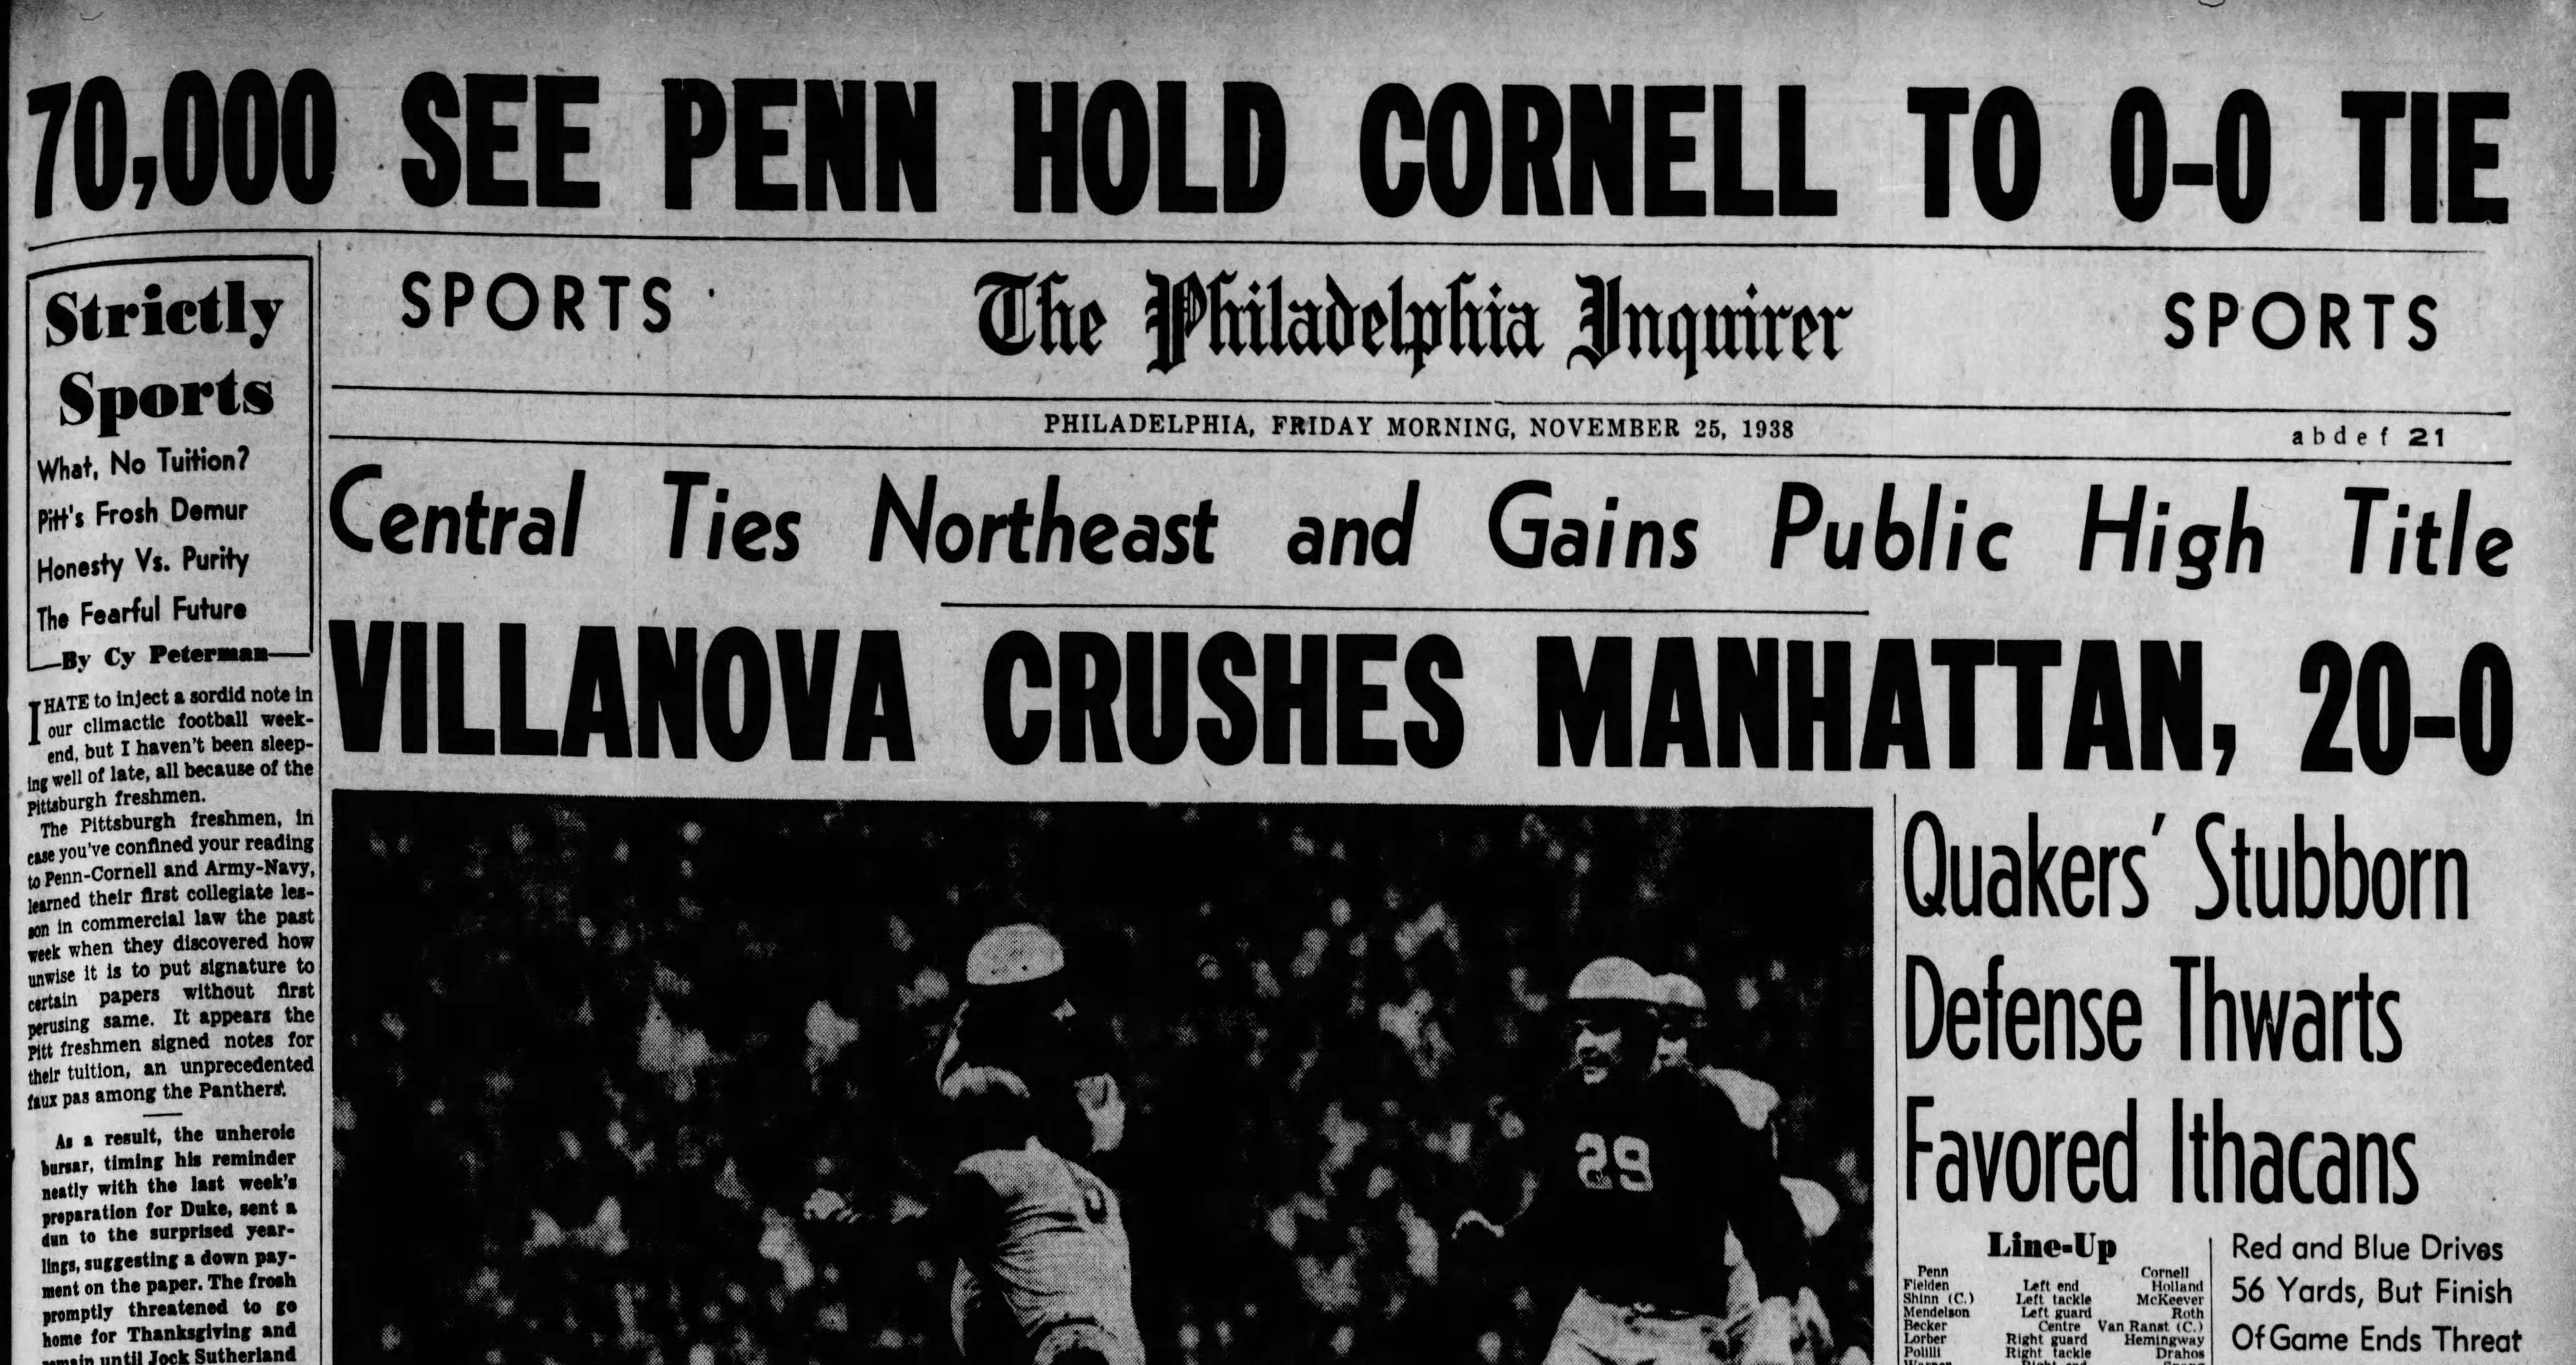 The front page of the Sports section of the Nov. 25, 1938, edition of the Philadelphia Inquirer.